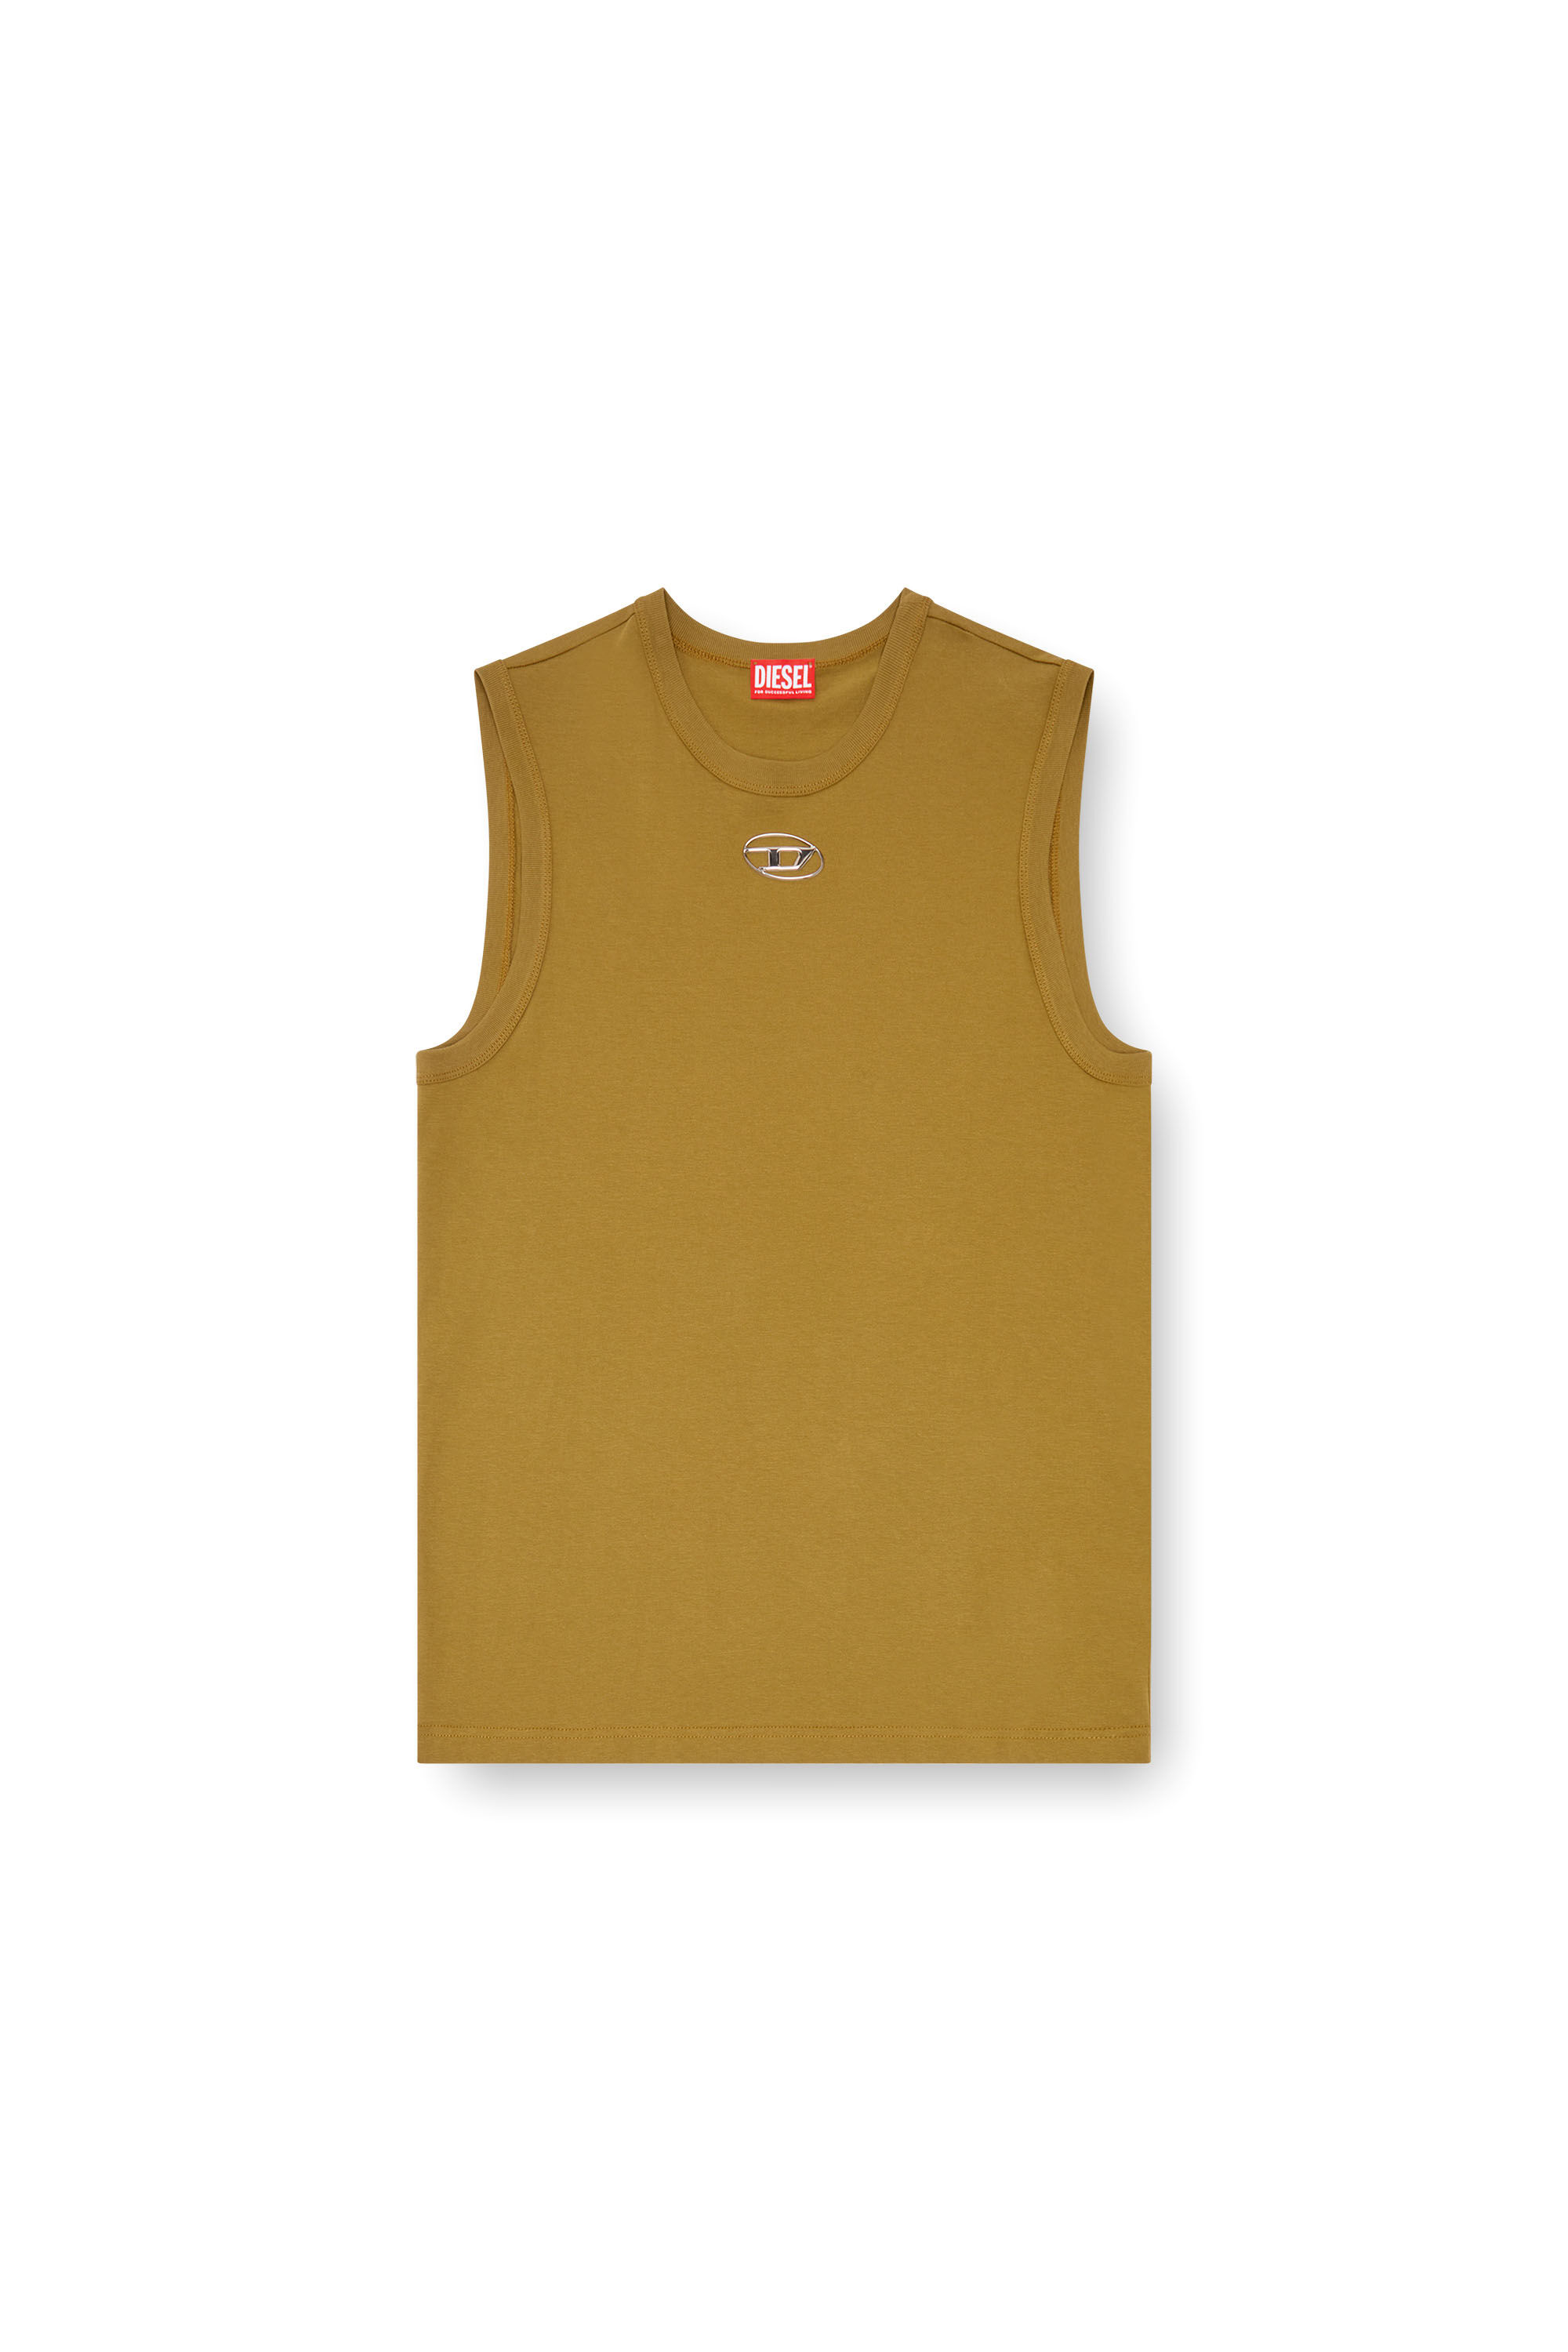 Diesel - T-BISCO-OD, Man Tank top with injection-moulded Oval D in ToBeDefined - Image 2